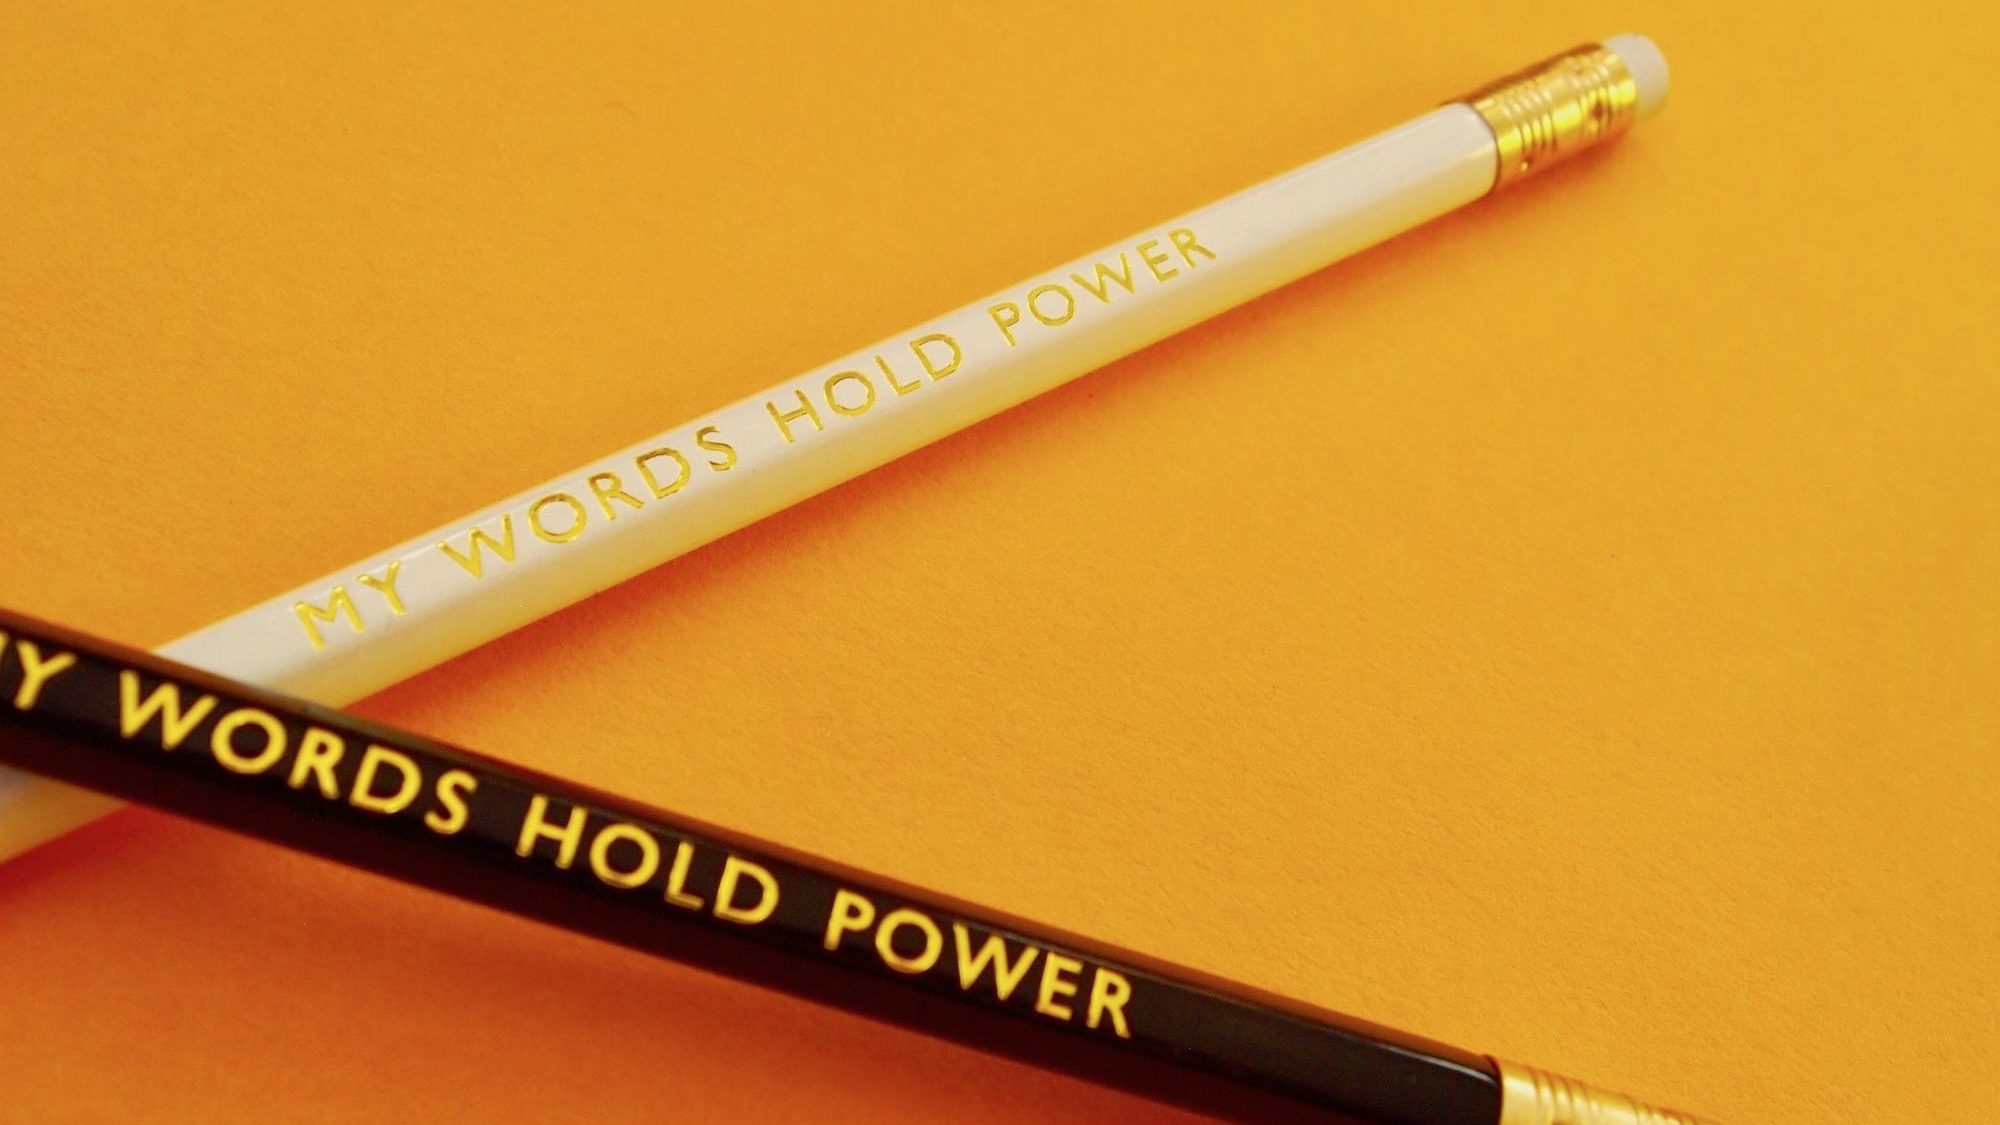 Pencils with "words hold power" affirmation